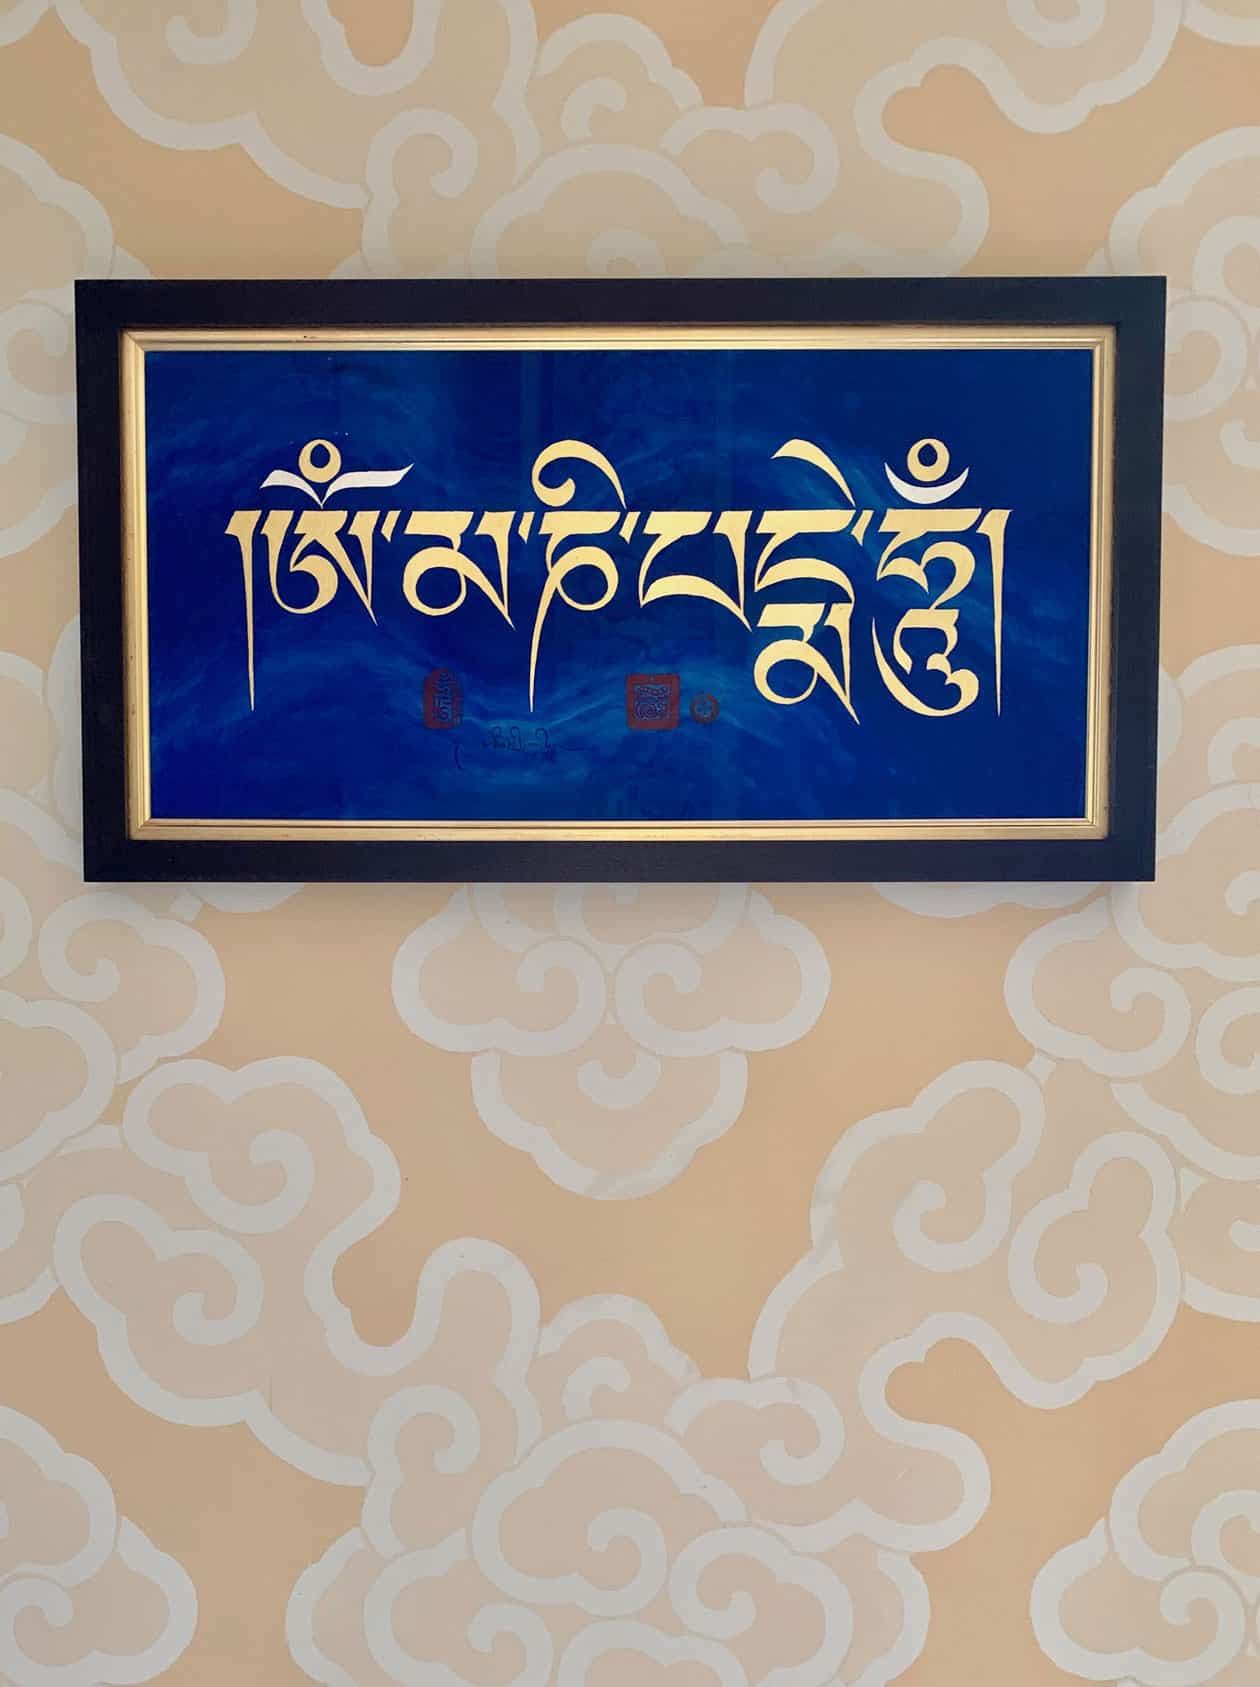 In Celebration of Tibetan Calligraphy Day.